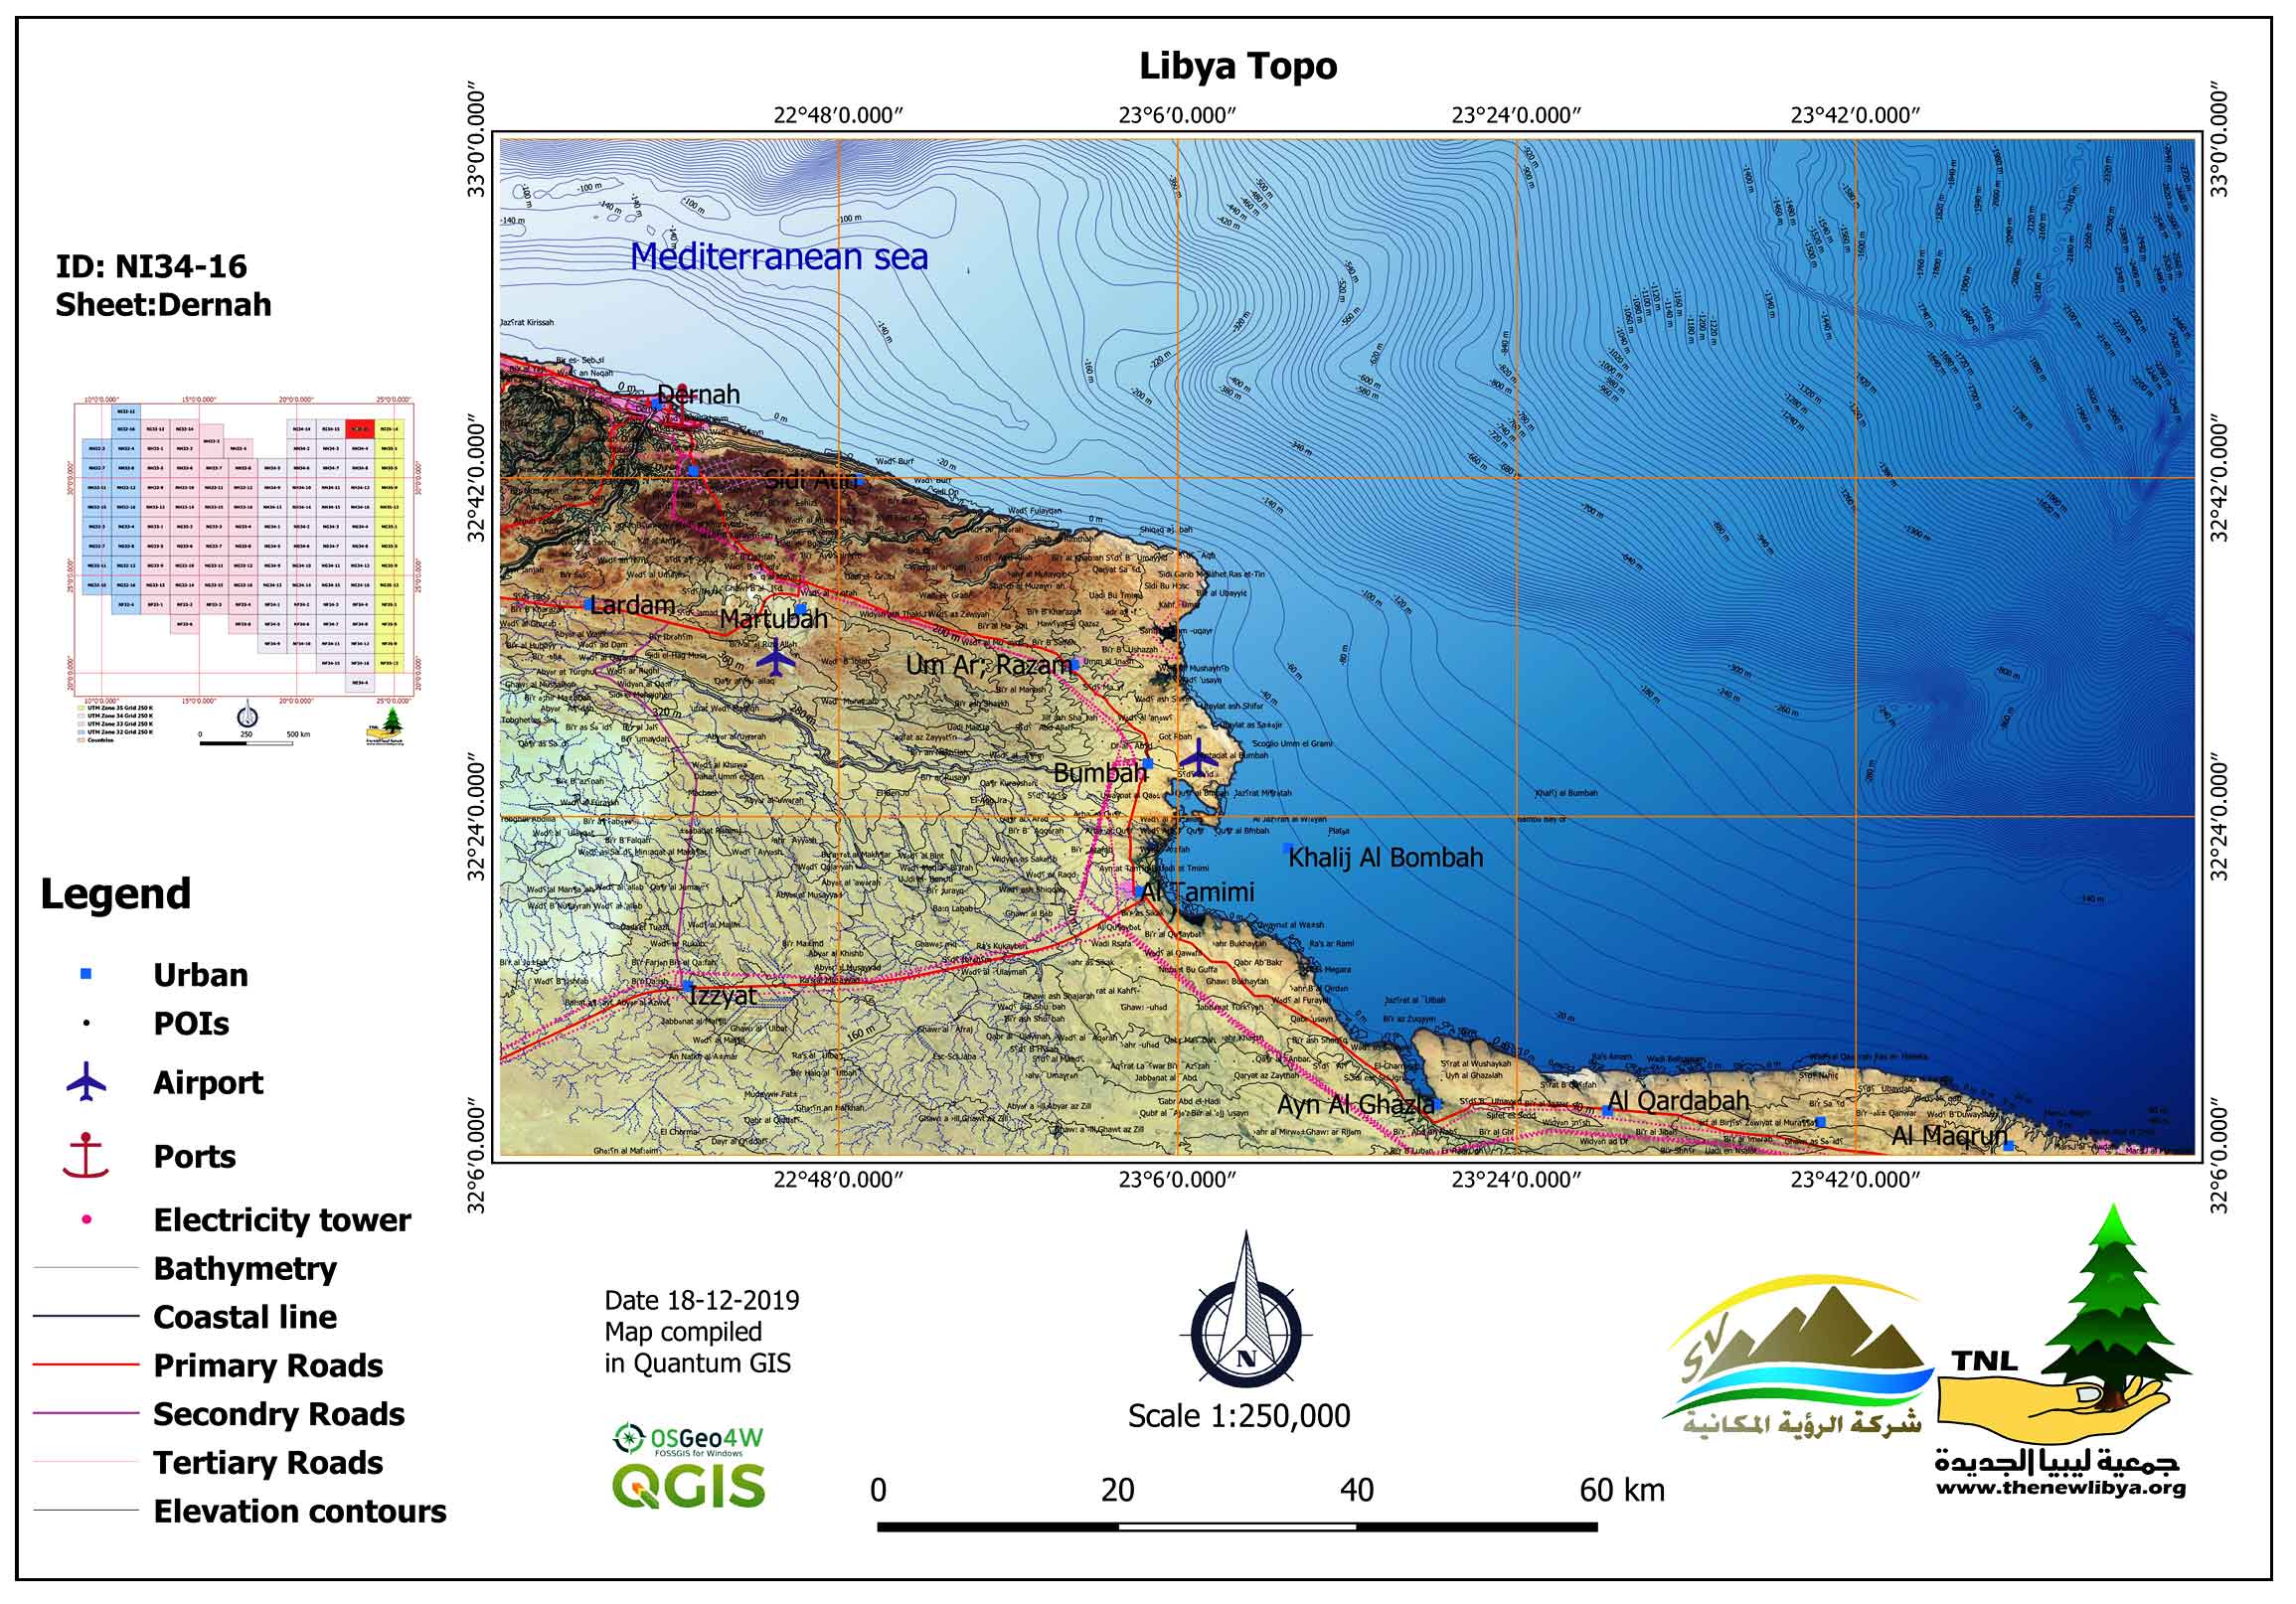 Updating Topographic Maps at Scale 1:250000 for Libyan Territory Using Quantum GIS (QGIS) and Open Geospatial Data: Libya Topo-Project